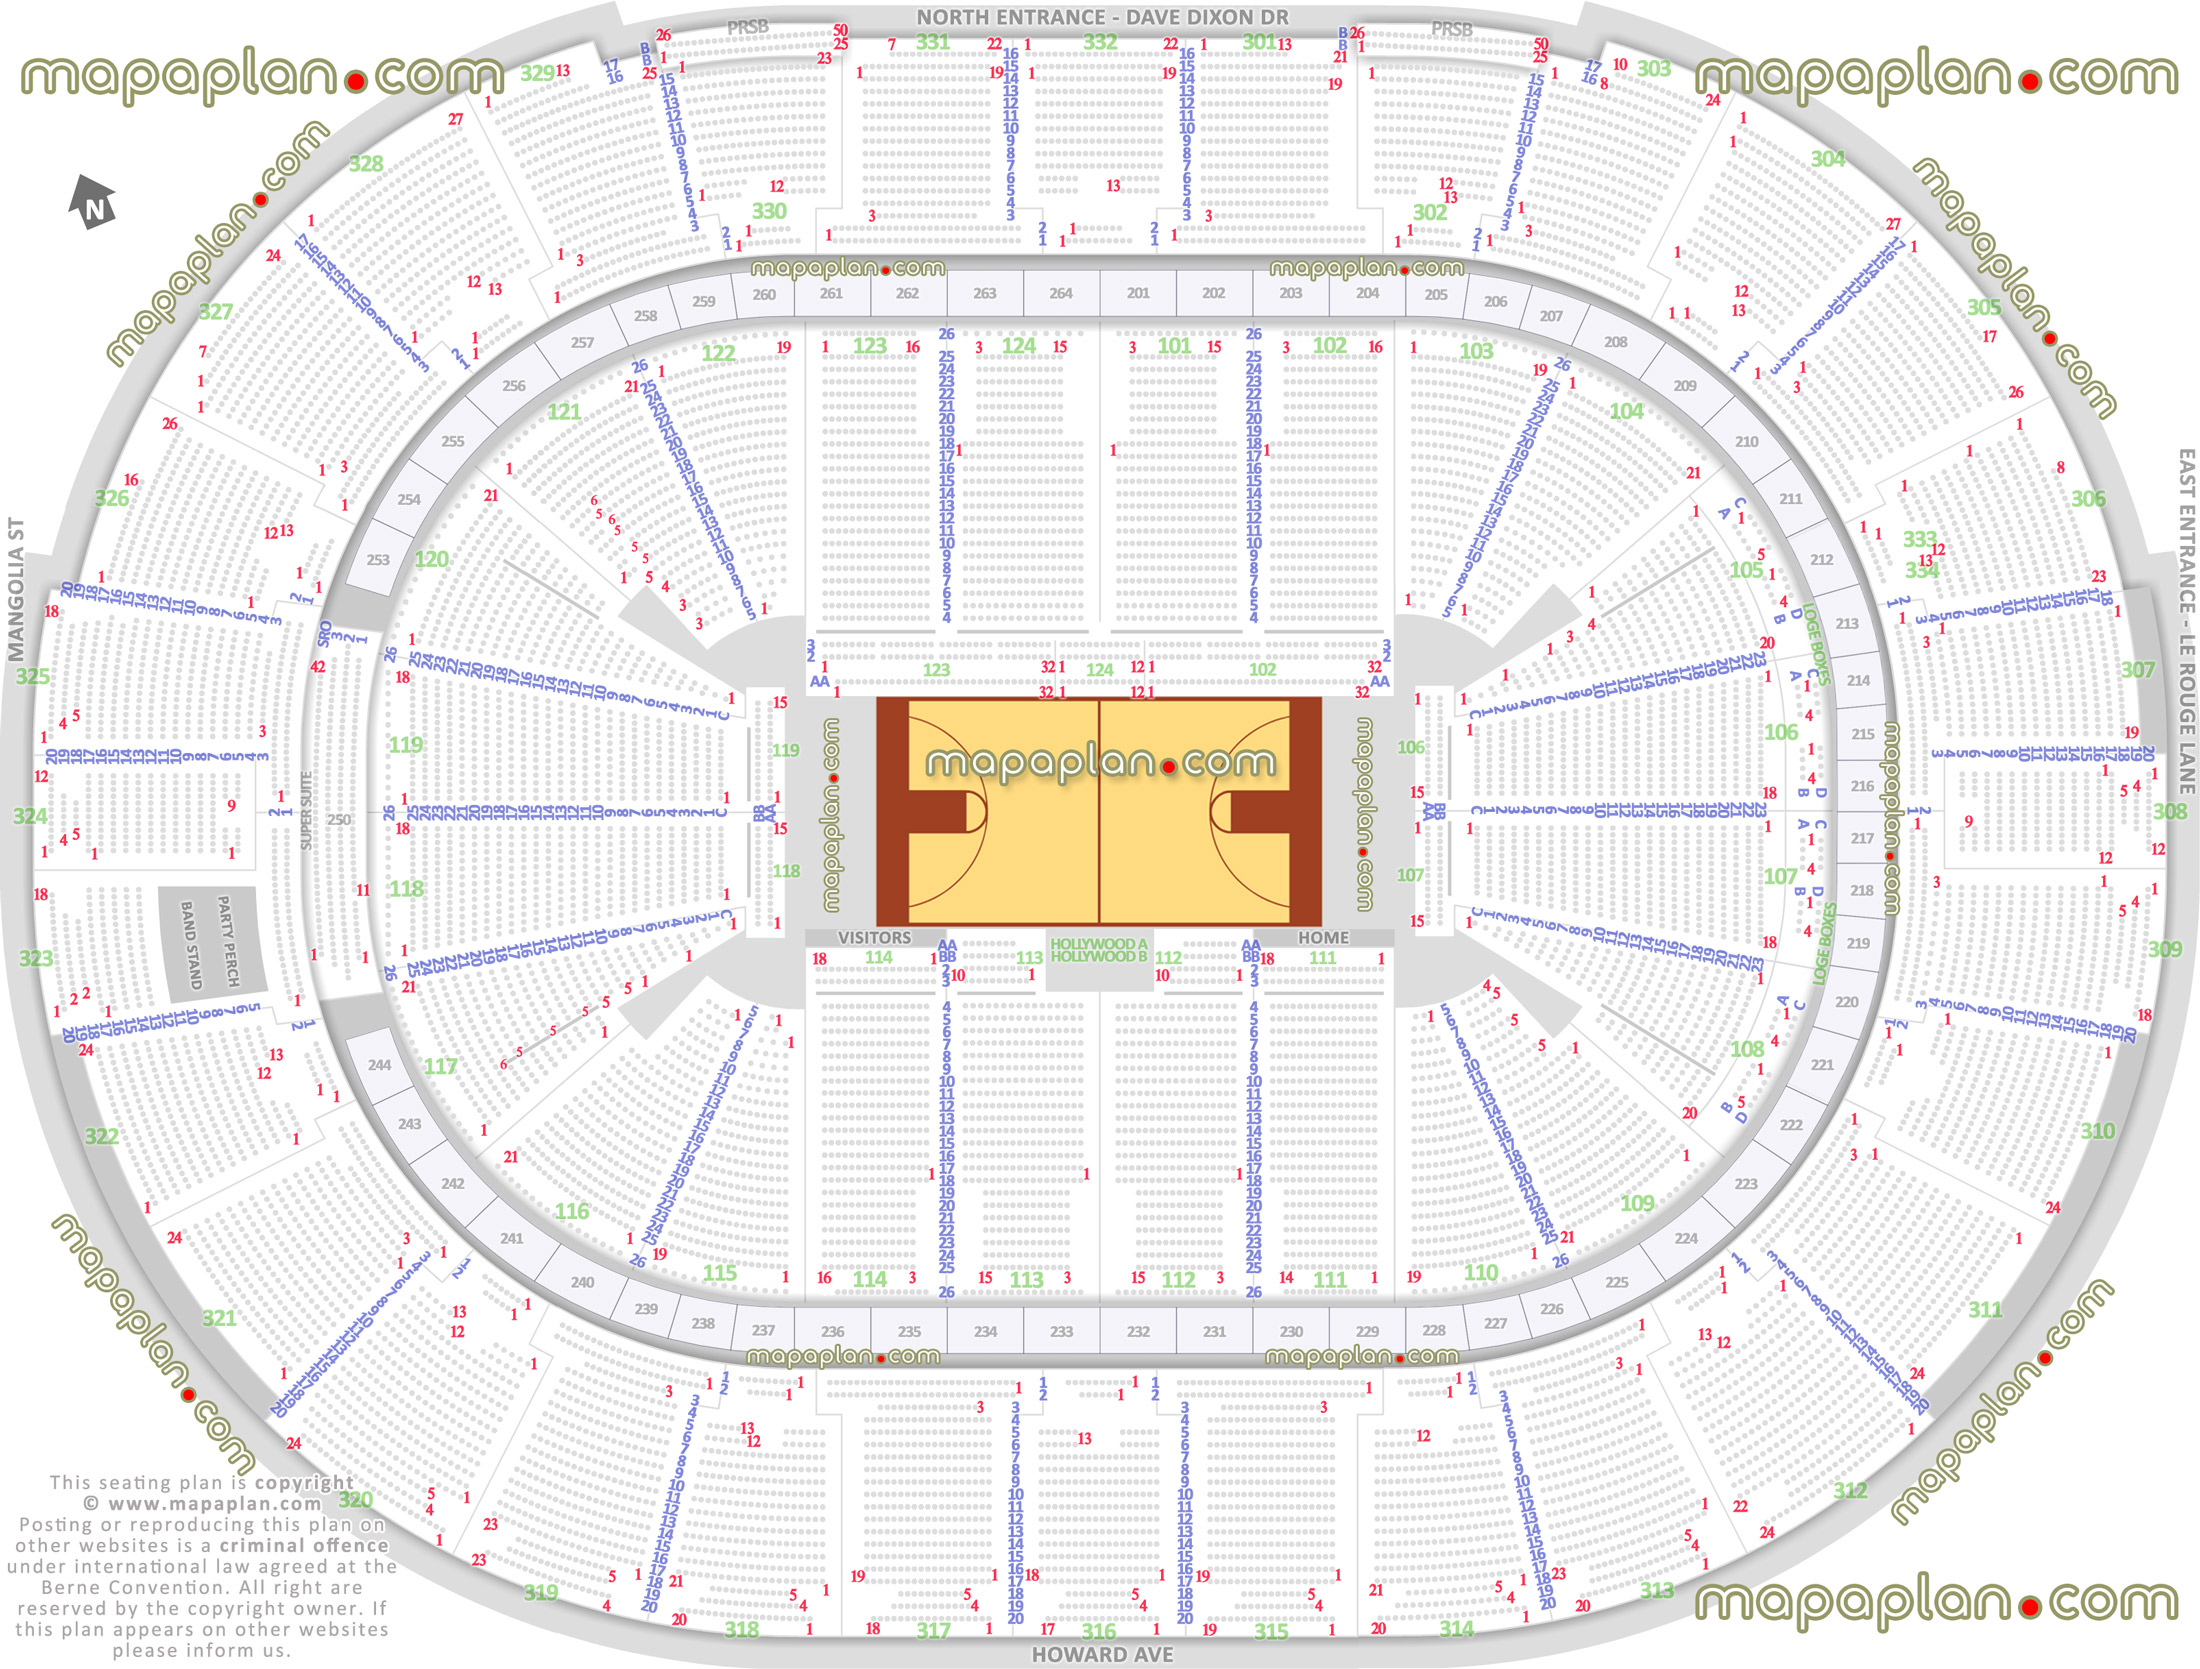 Smoothie King Center arena Basketball plan for New Orleans Pelicans